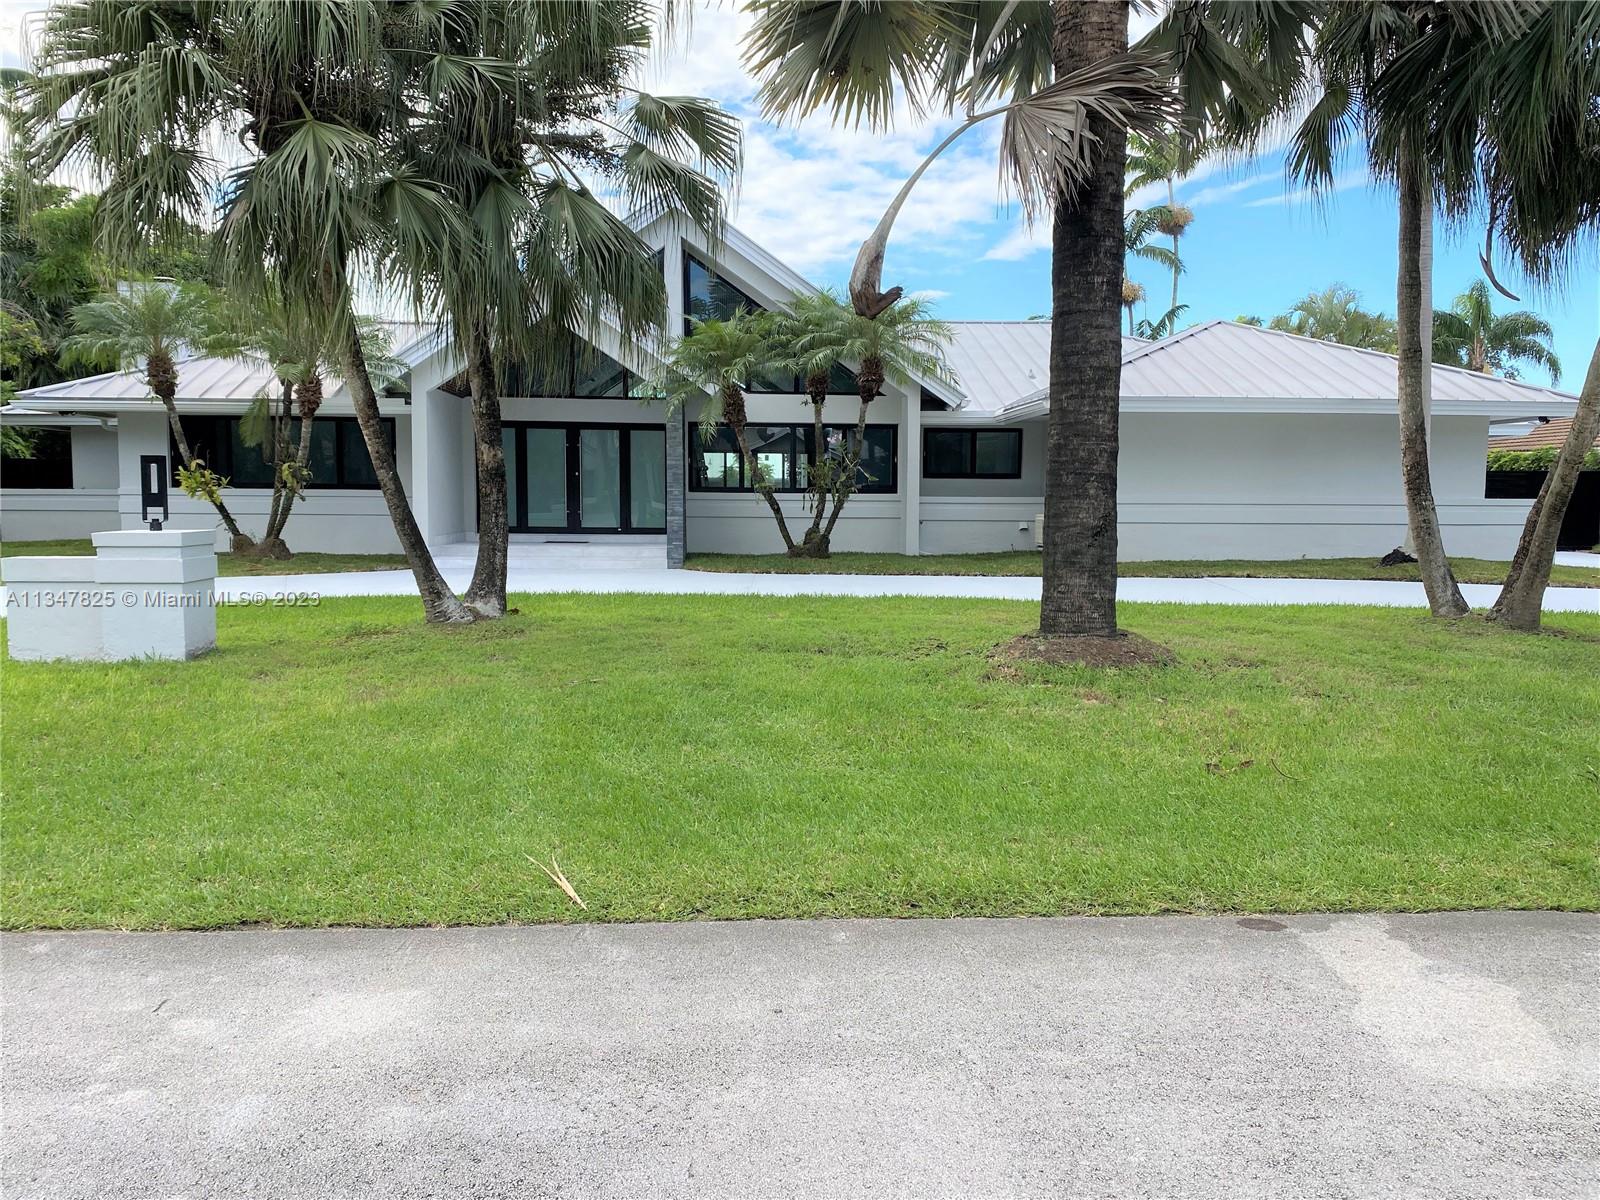 Be the first to see this gem, exquisitely renovated, no expense spared, huge 5 bedroom three and a half bath with 4,600 SF actual area set on a 16,999 SF. Cul d Sac lot in highly desirable location in Pinecrest, featuring soaring ceilings and windows - Open Light and bright, perfect Split Plan, immense Open Eat-in Kitchen that flows out to the beautiful open HEATED POOL and a Tranquil Tropical patio surrounded by a tremendous yard area perfect for entertainment, central vacuum, 2 car garage, completely fenced and gated, beautiful metal roof, impact doors and windows and much much more to mention here, ready to move right in, please see Brokers remarks.